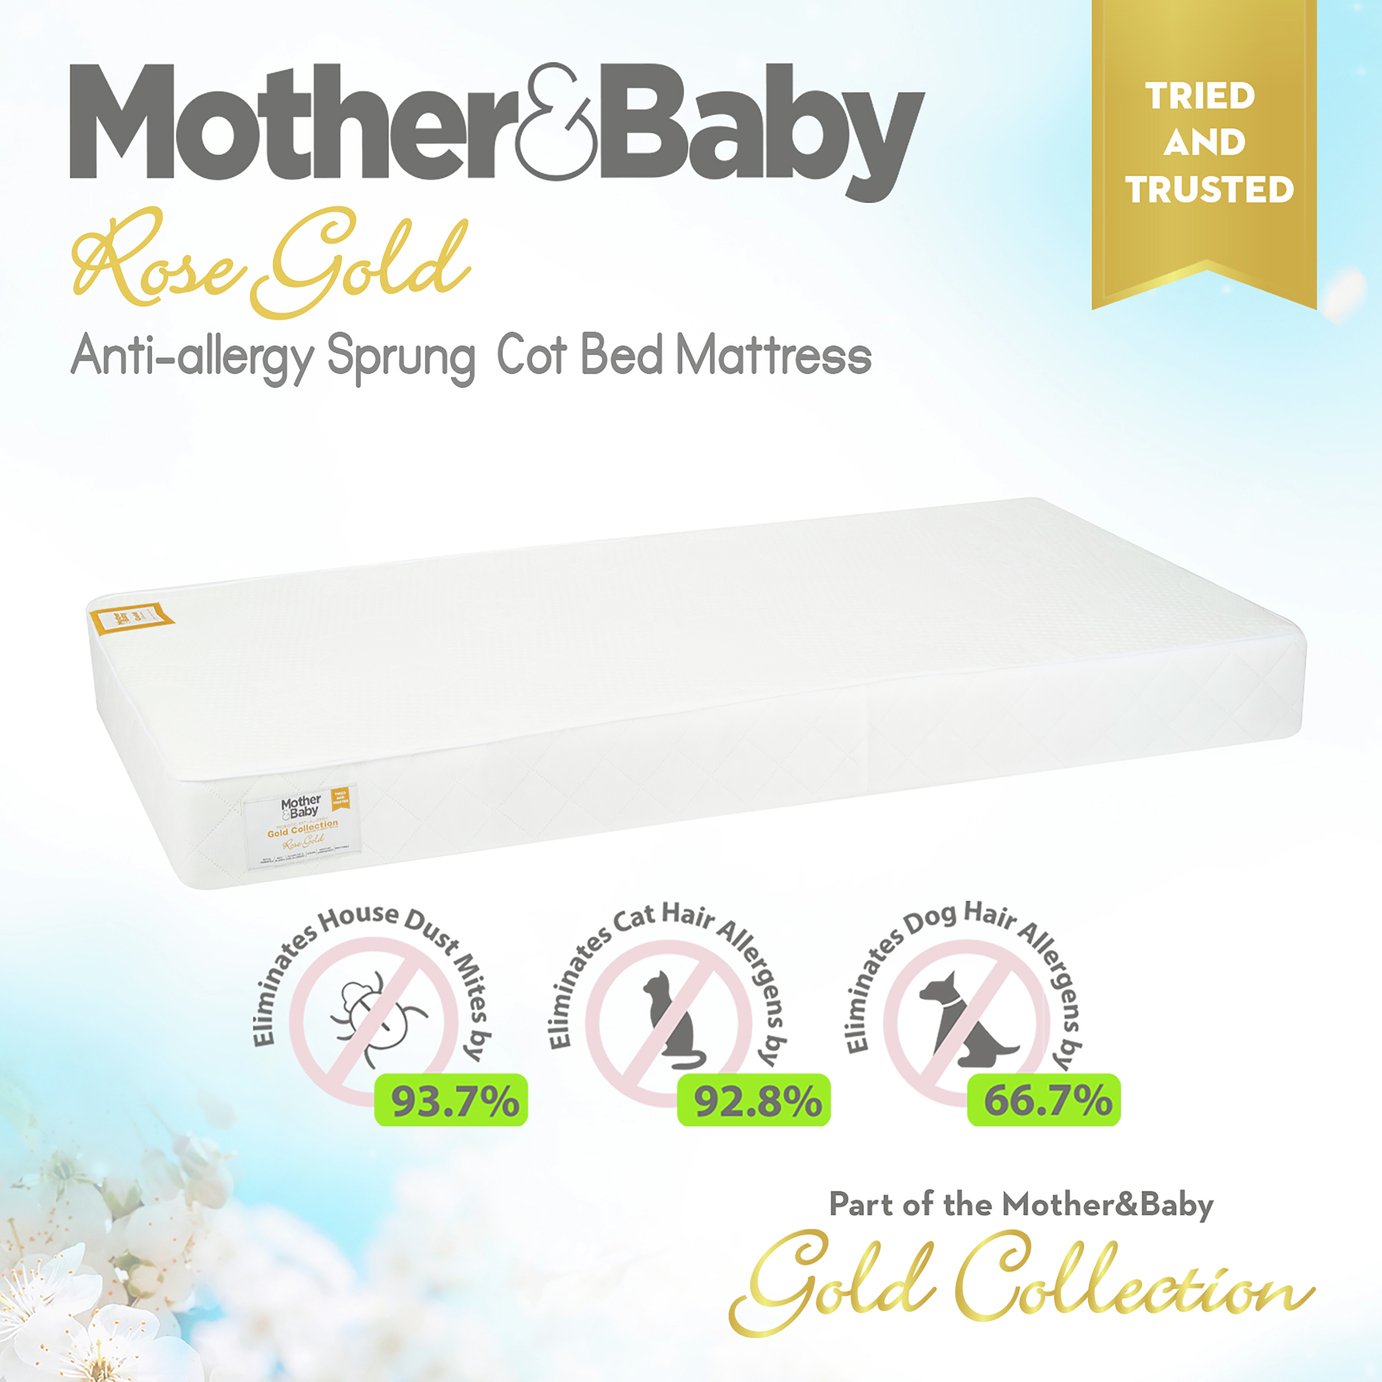 Mother&Baby 140 x 70cm Anti-Allergy Sprung Cot Bed Mattress Review